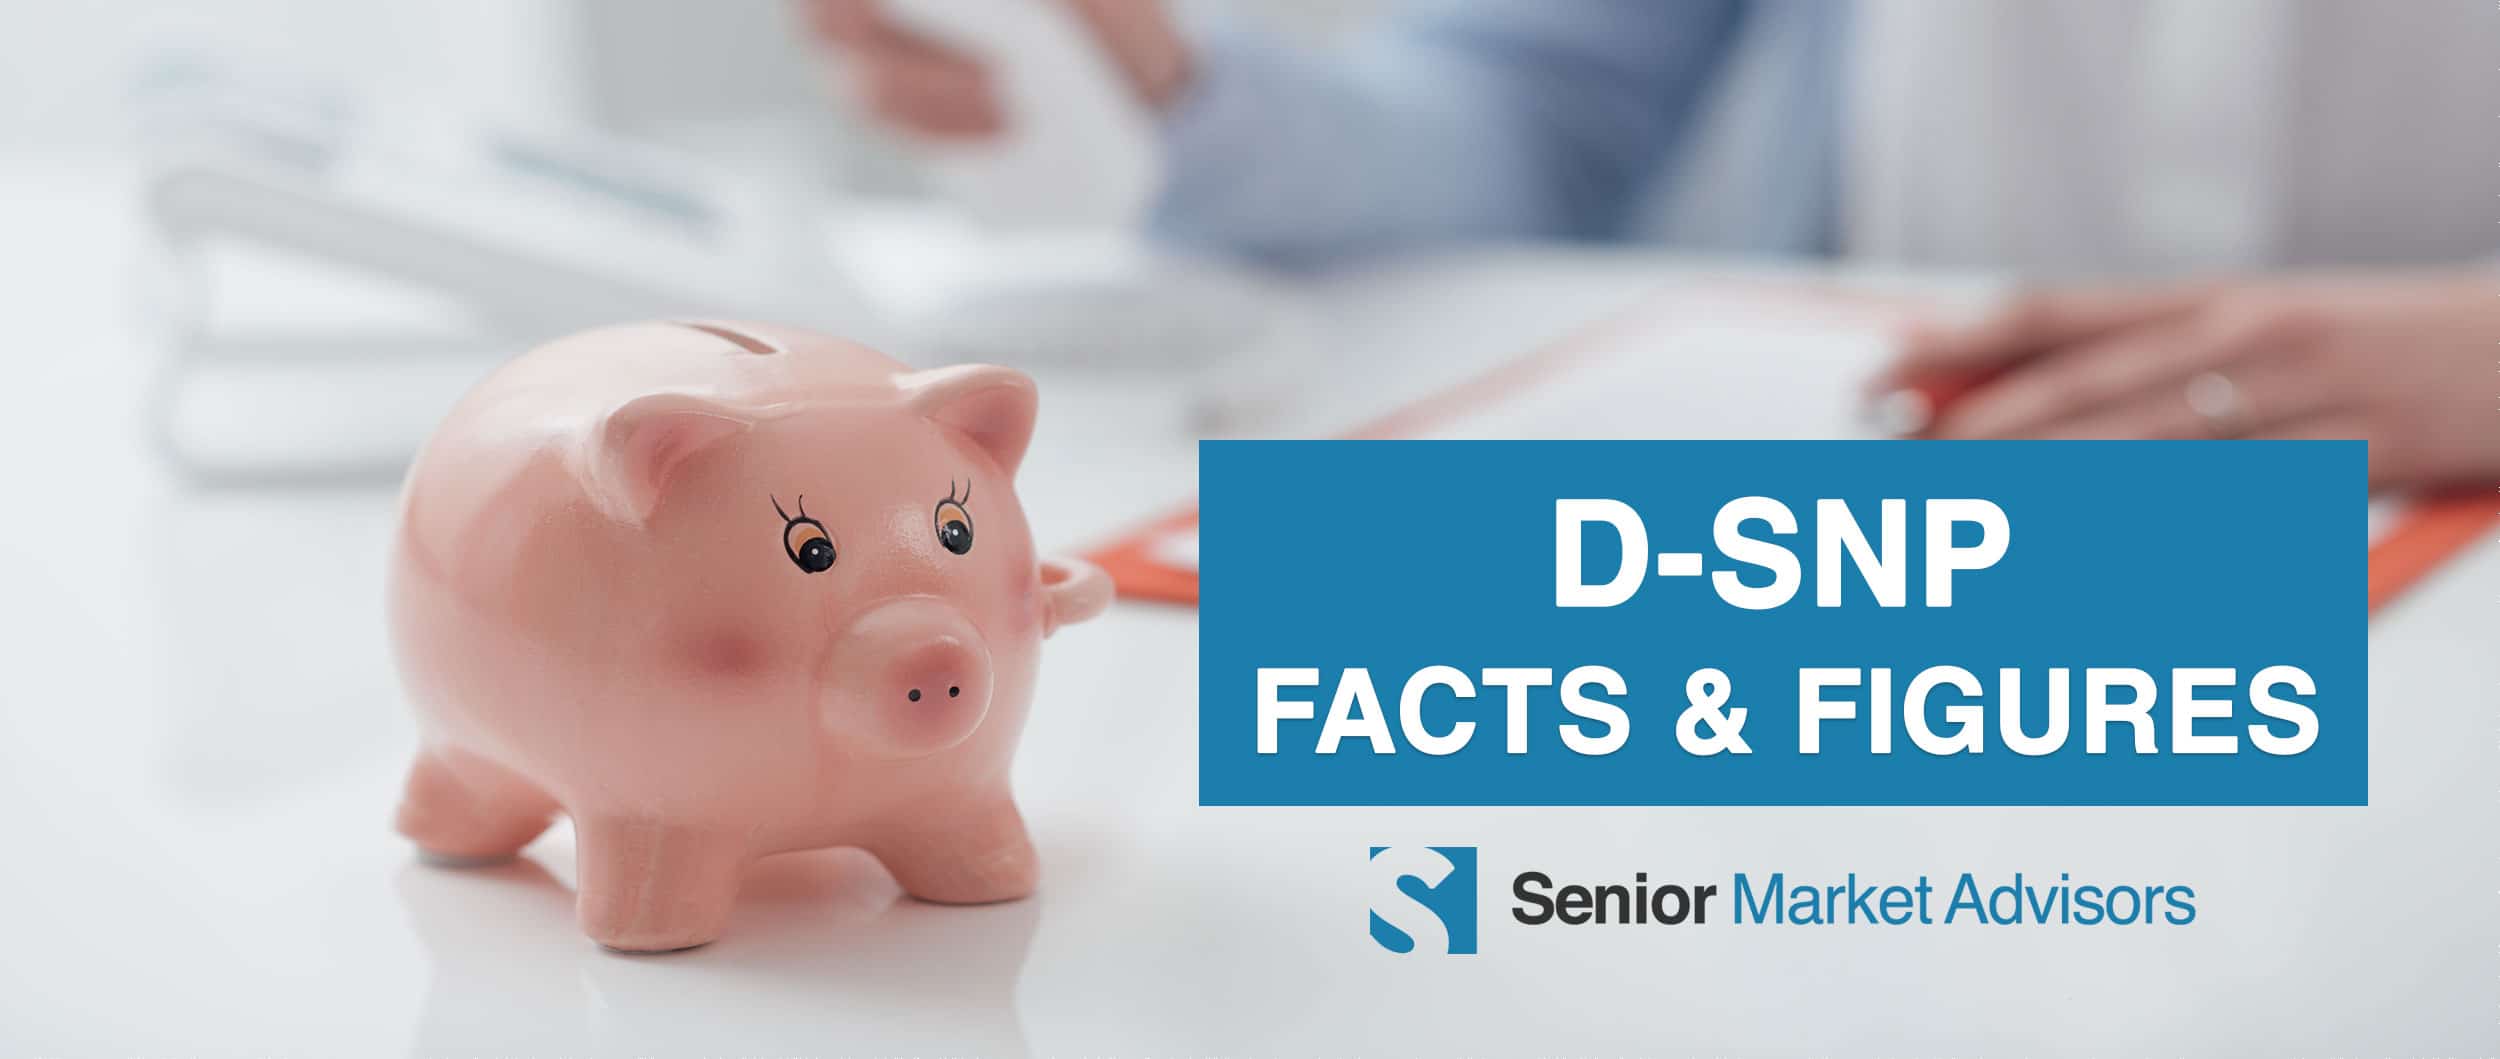 DSNP Facts and Figures | Senior Market Advisors